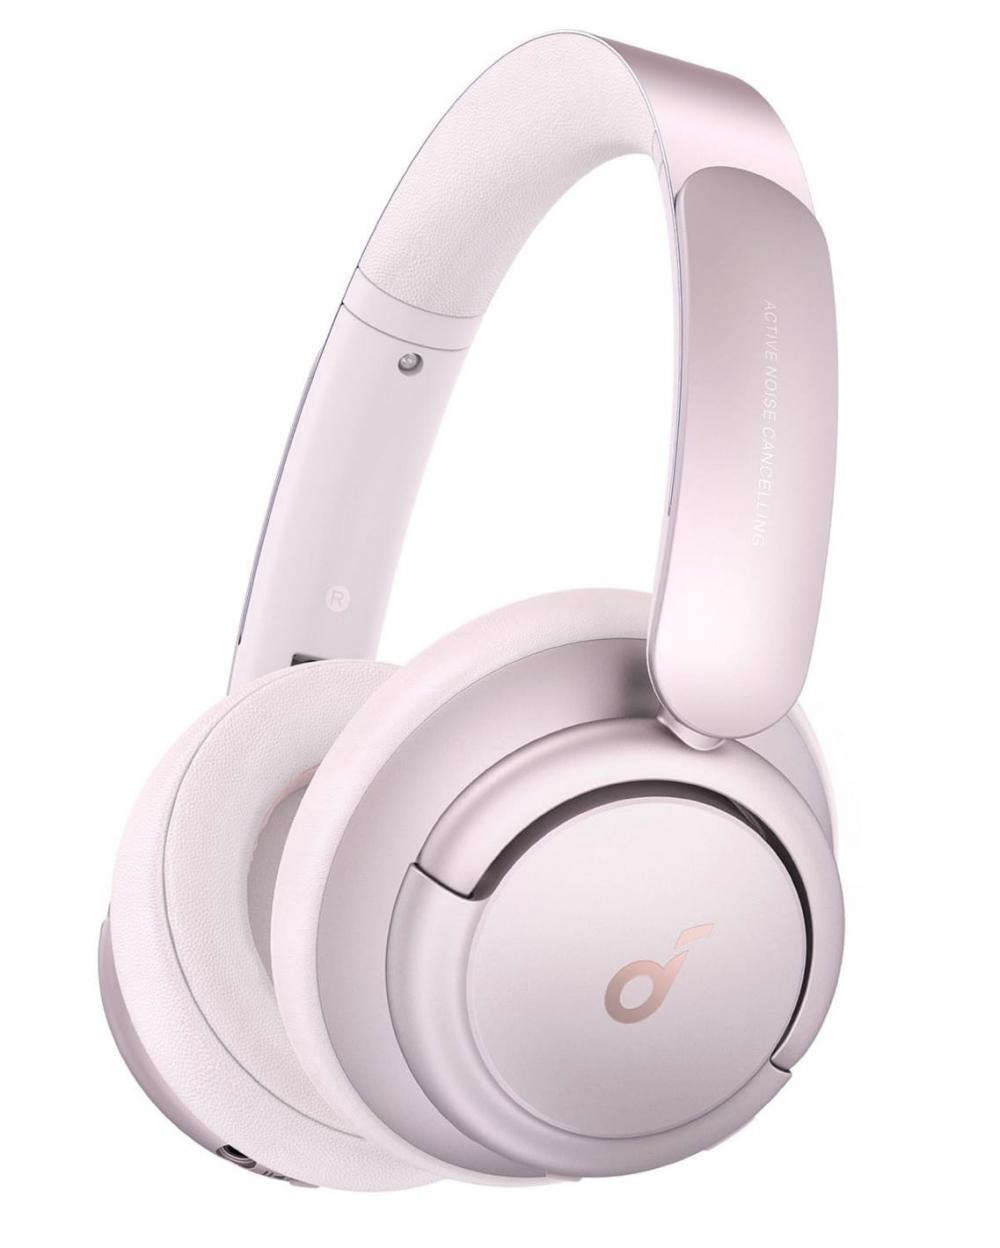 The Weekend Leader - Soundcore launches two new noise-cancelling headphones